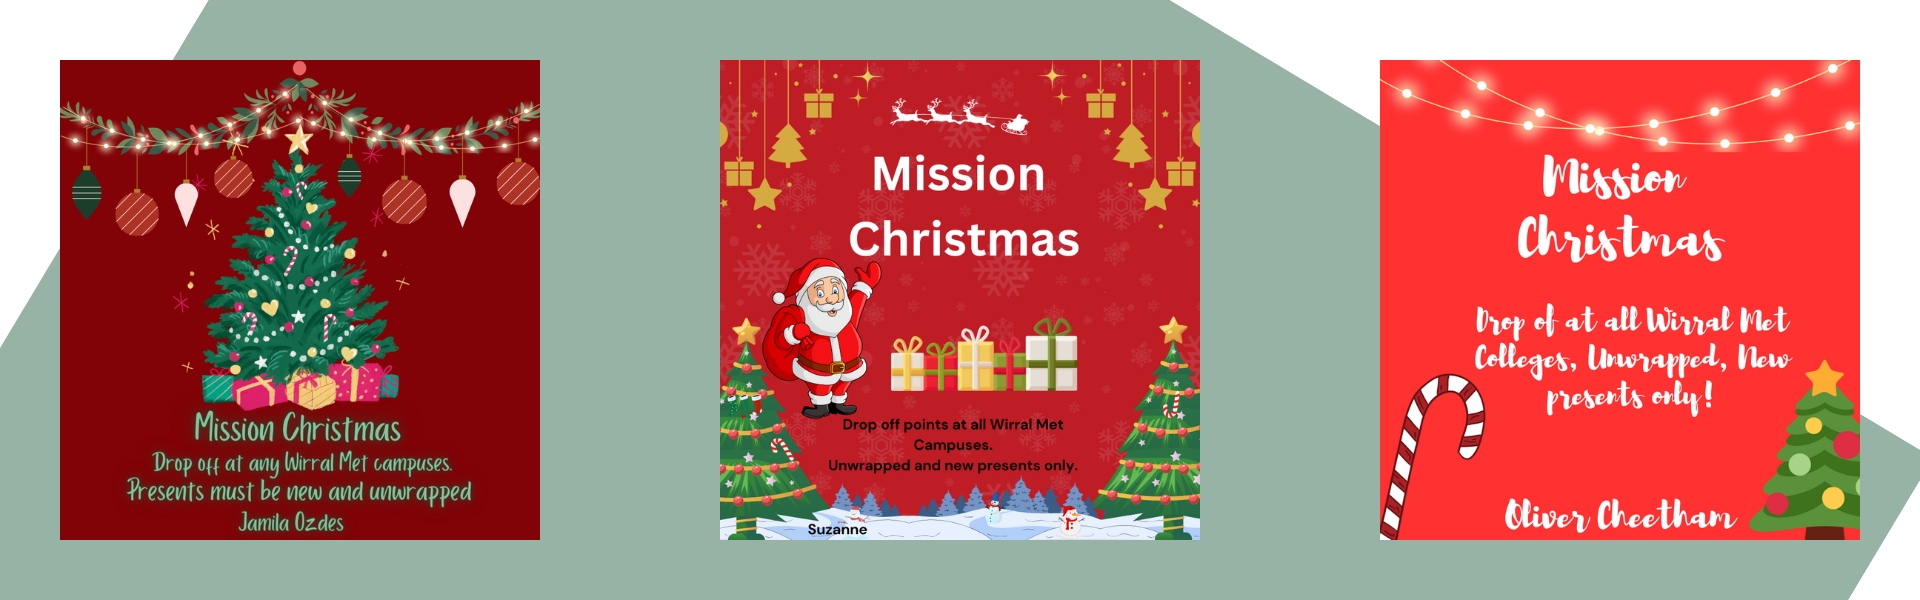 Mission Christmas Banner featuring different social media pictures designed by students